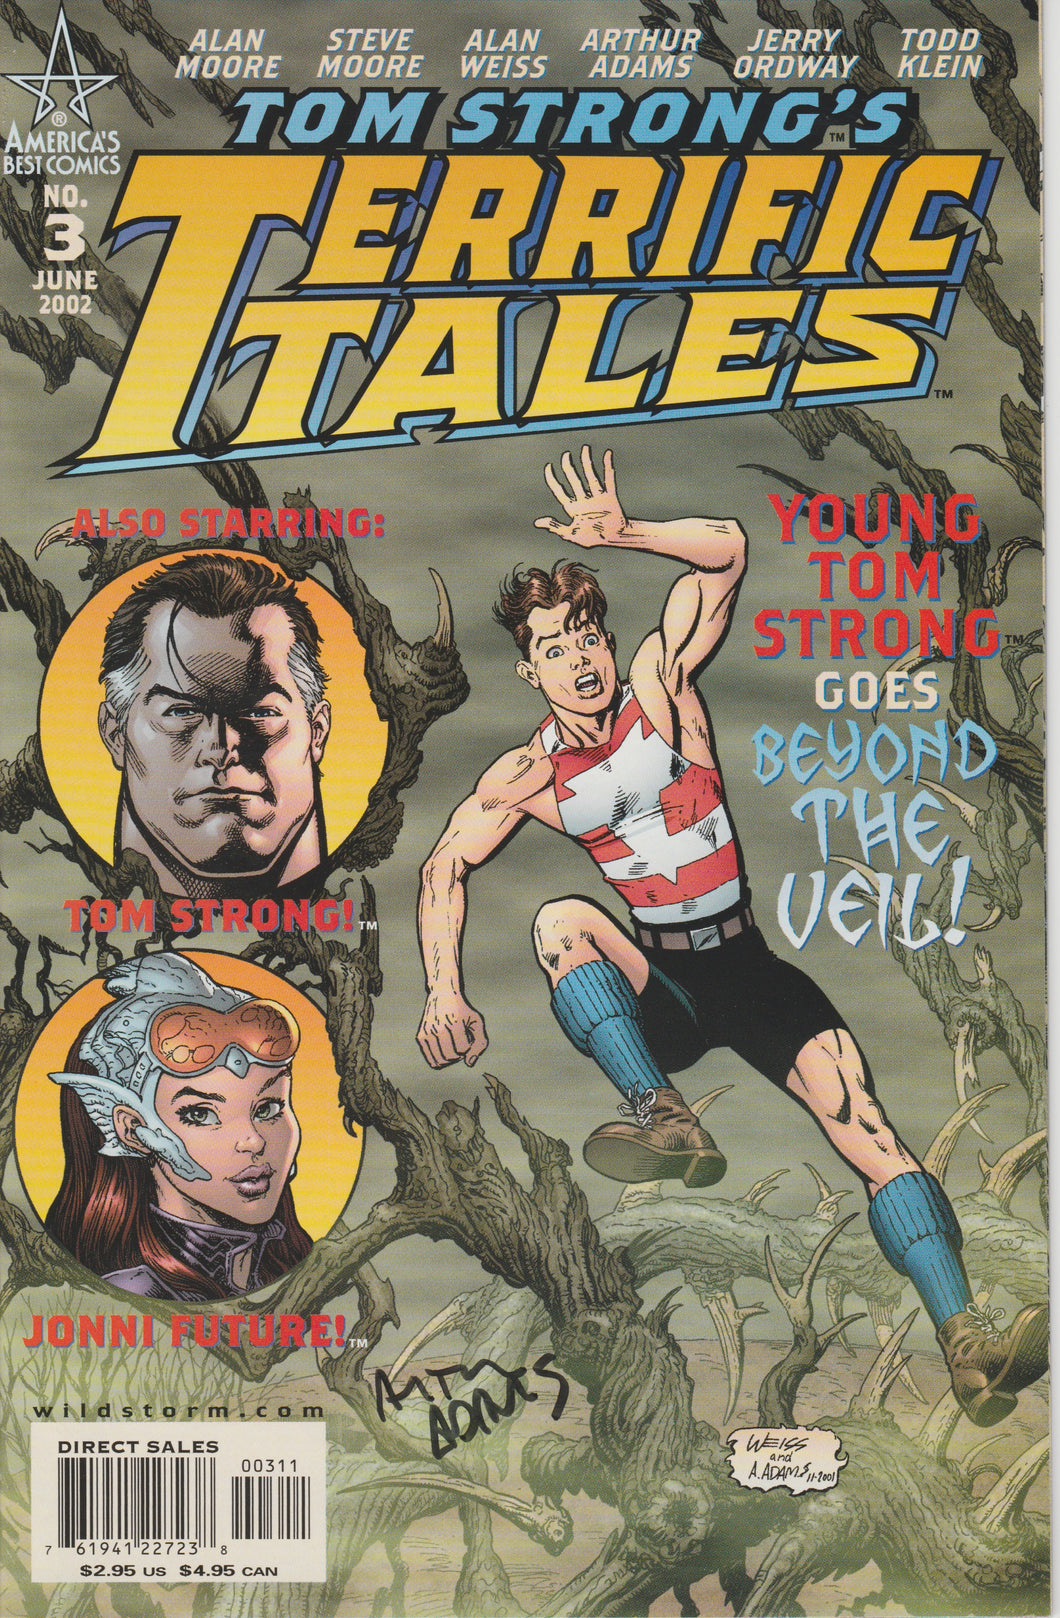 Tom Strong's Terrific Tales #3 signed by Arthur Adams